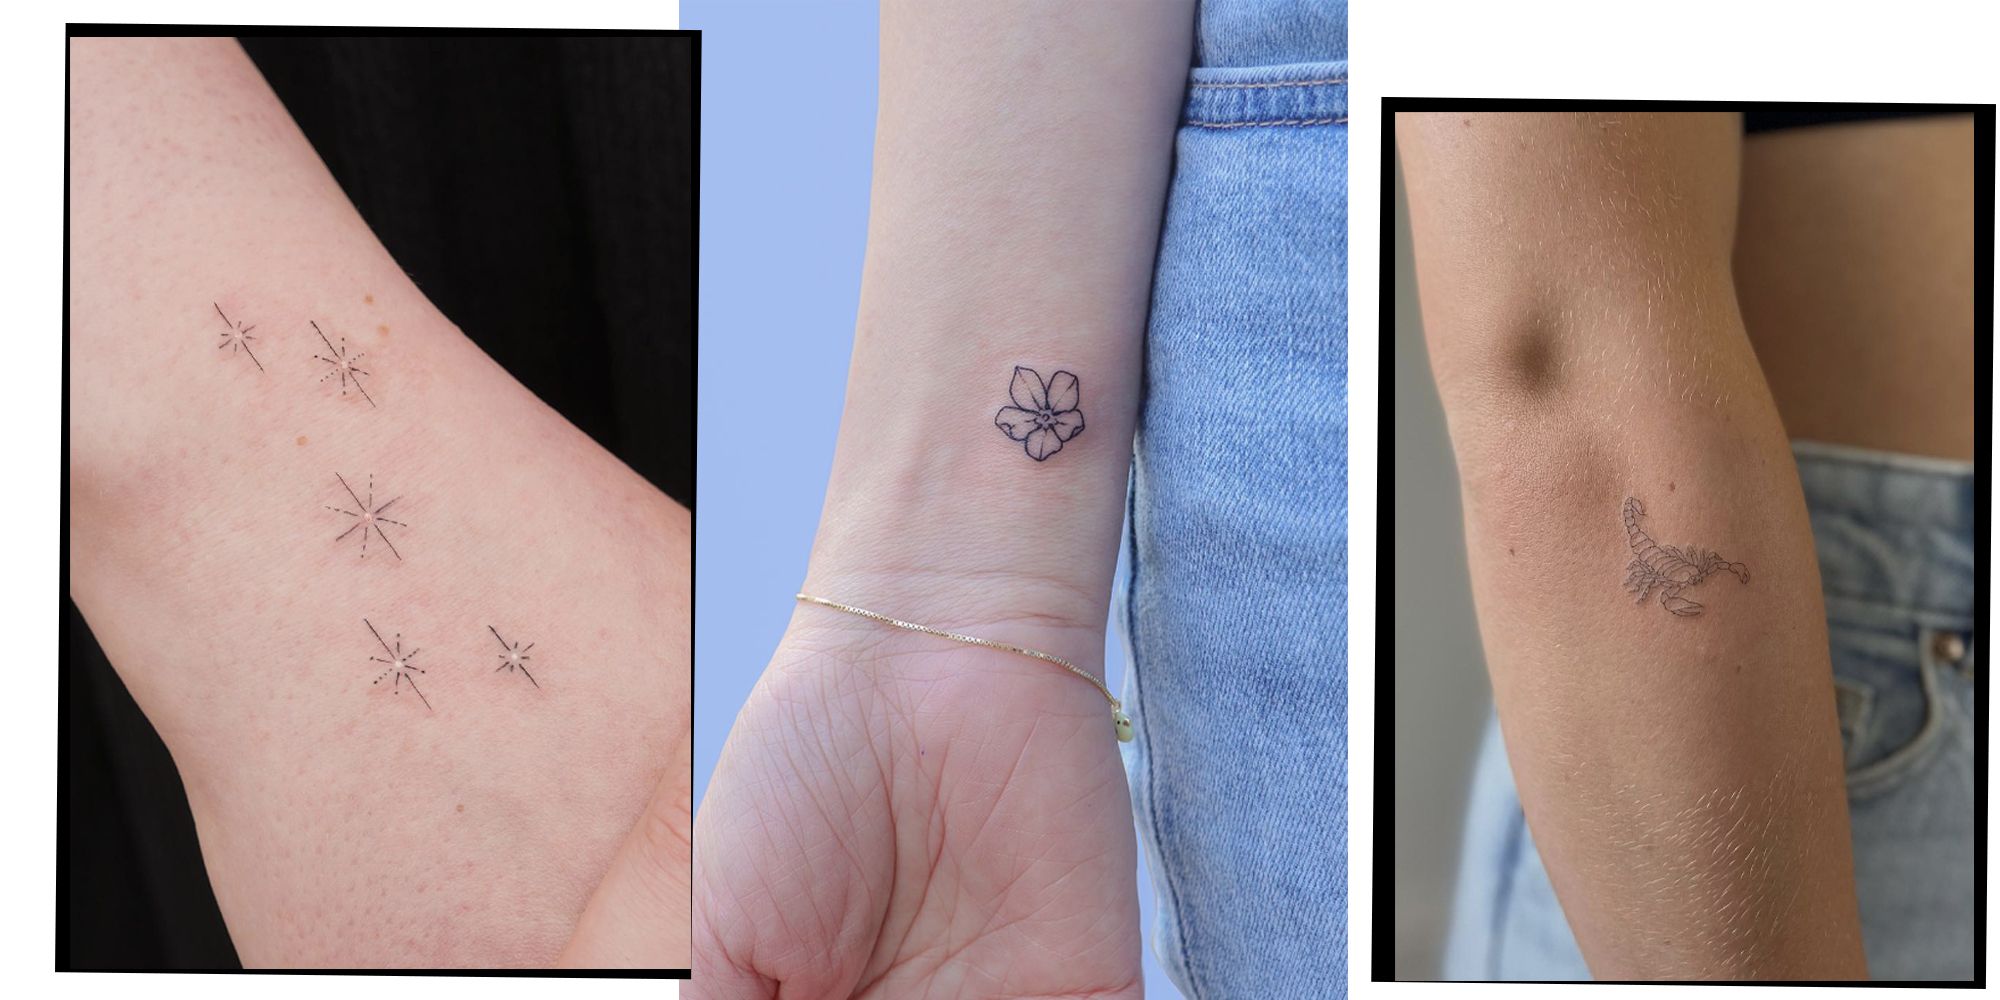 Small Tattoos With Meaning: 22 Symbolic Tattoo Designs